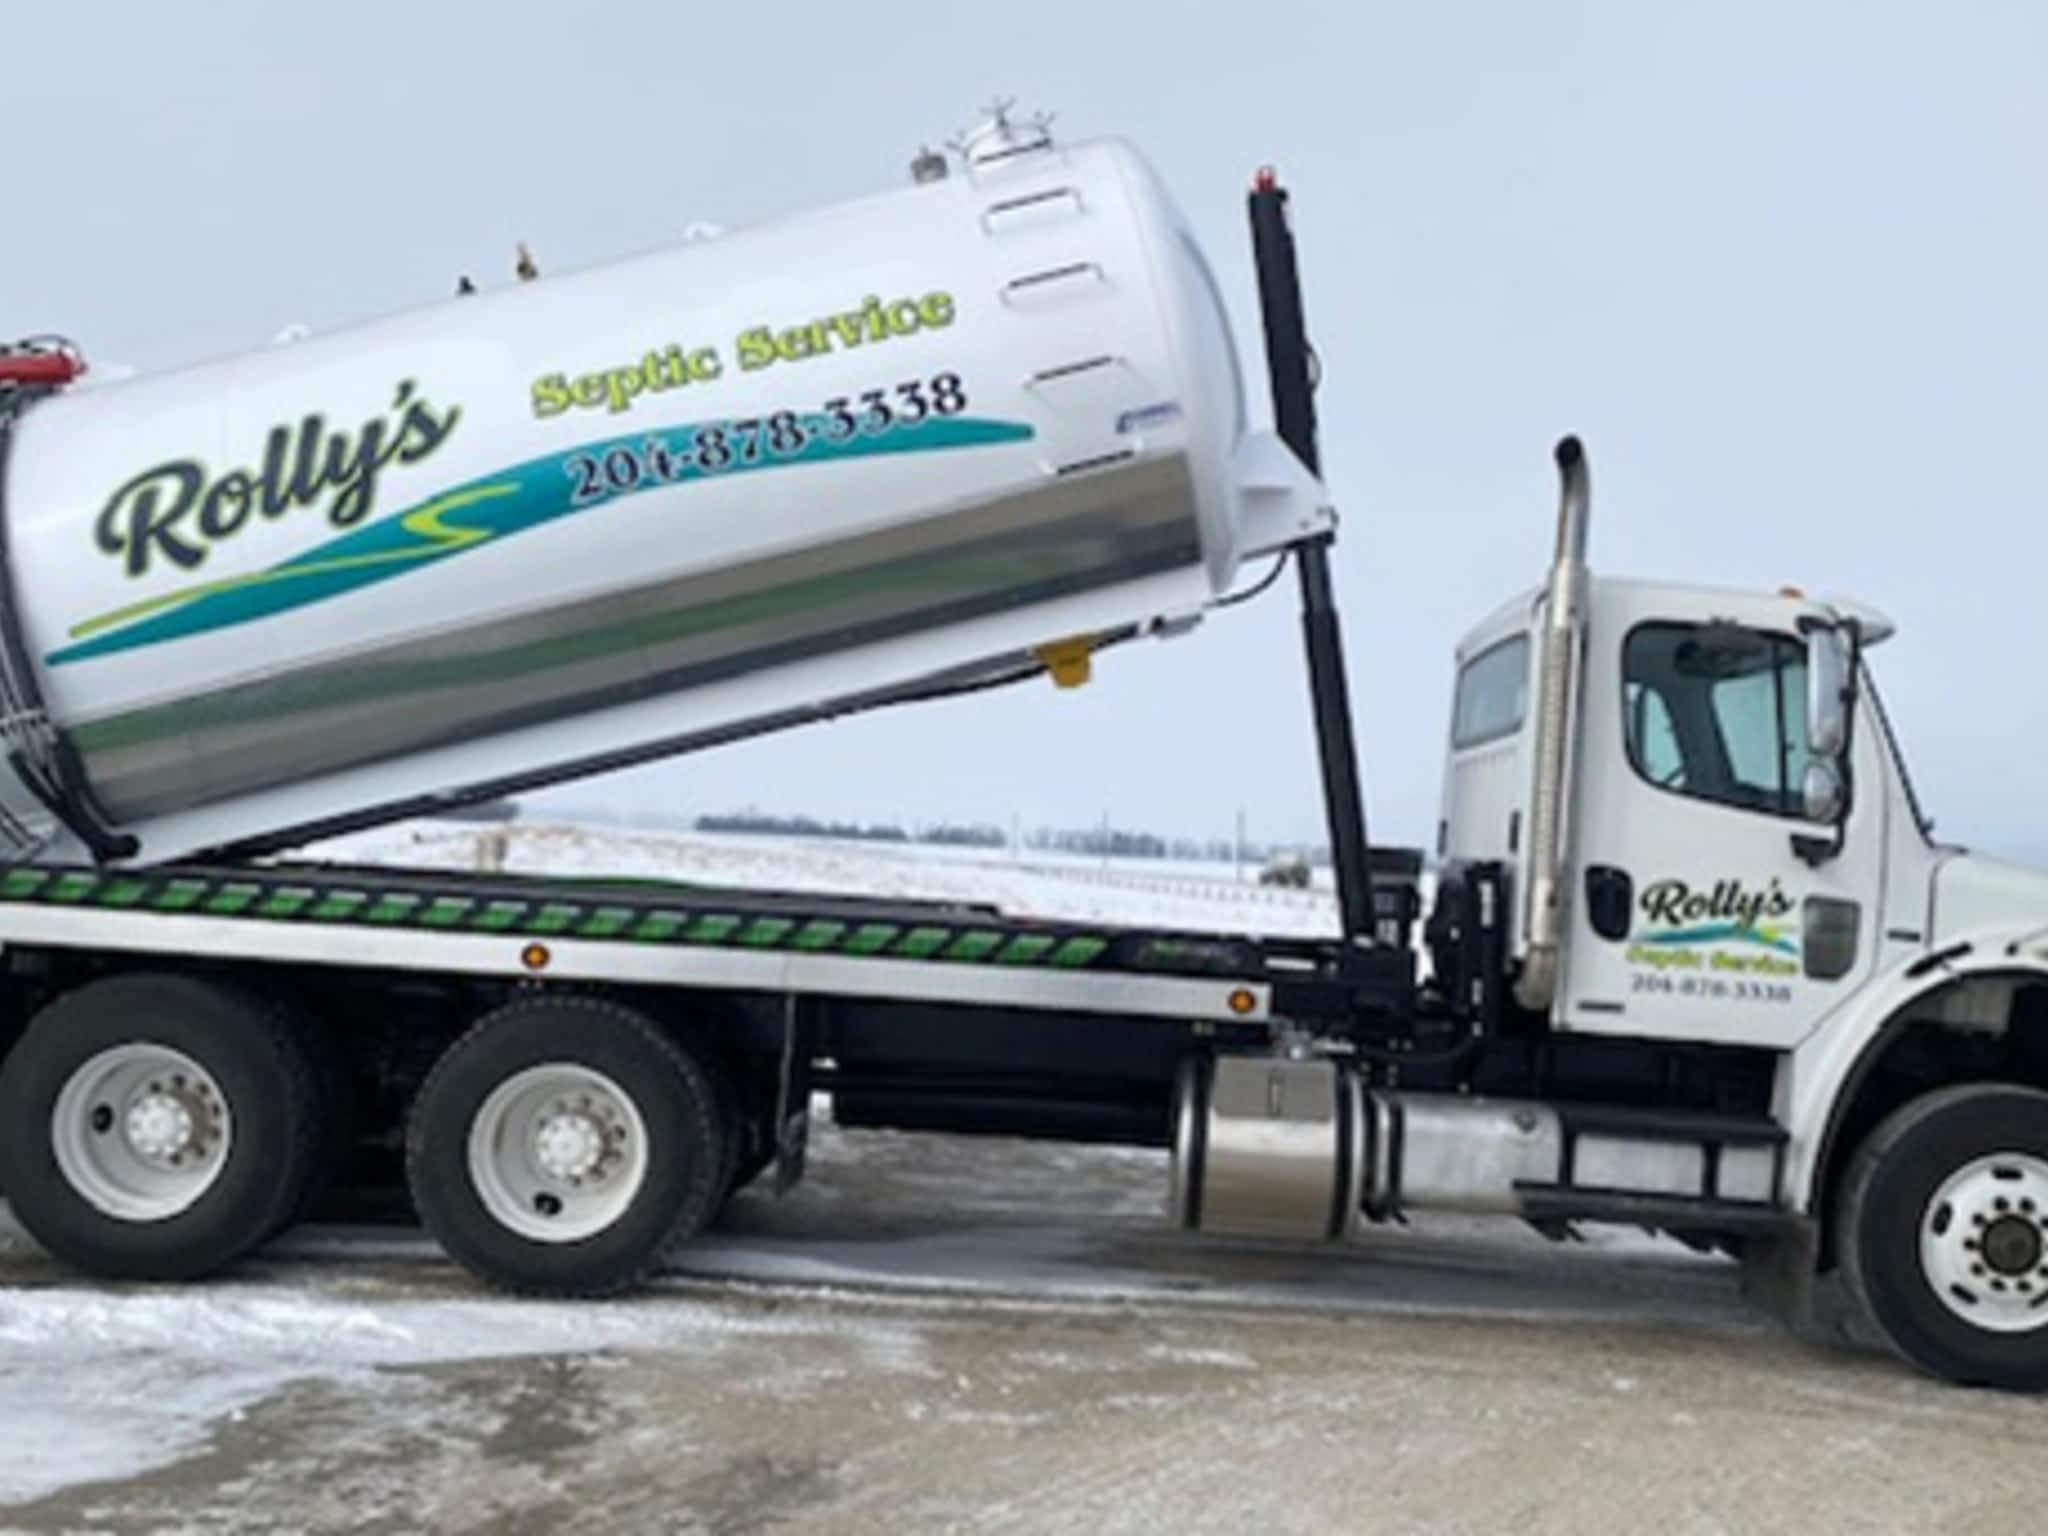 photo Rolly's Septic Service LTD